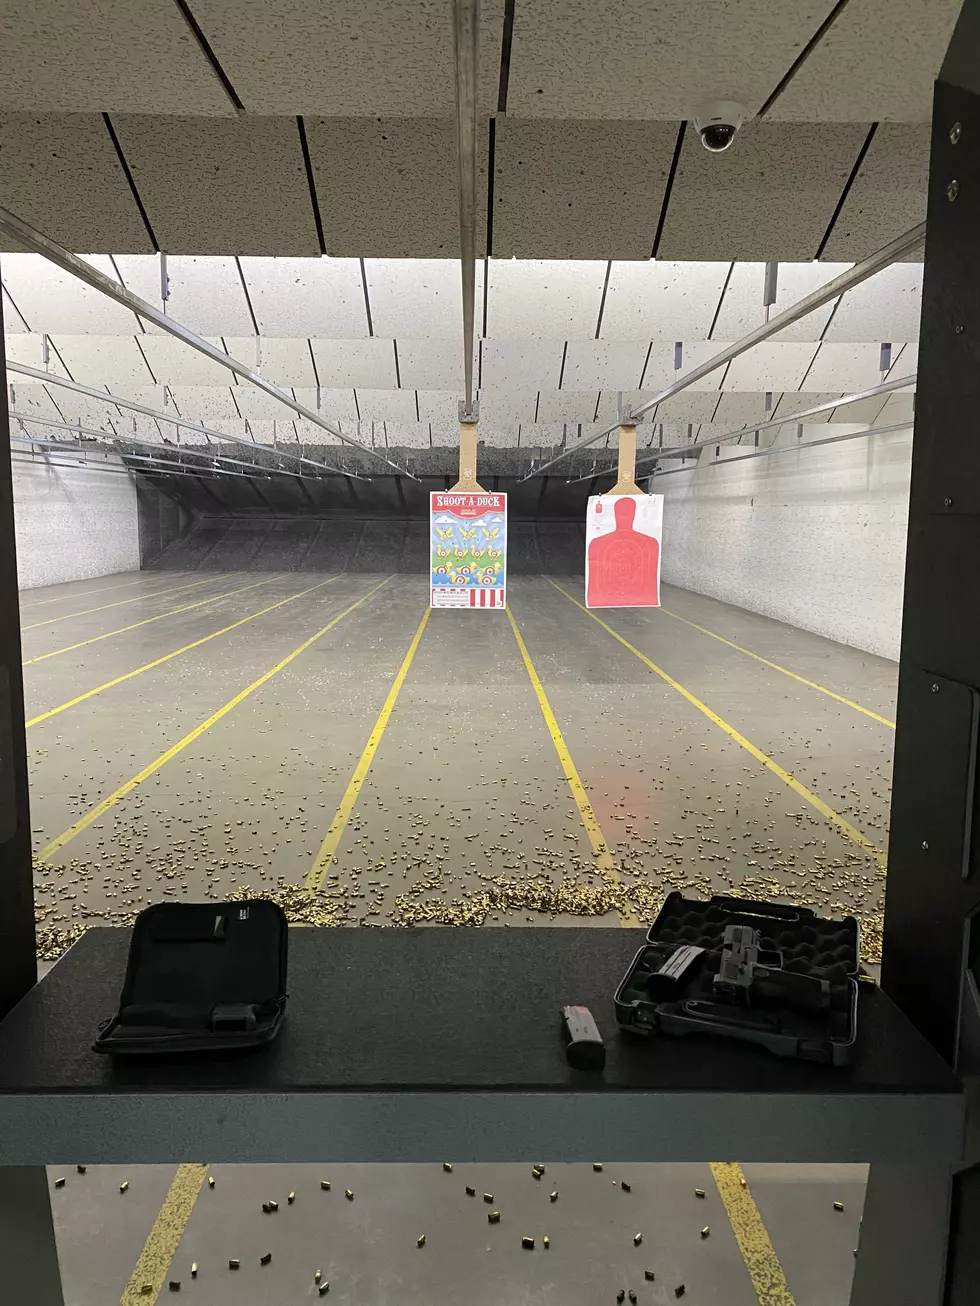 A Day At The Range